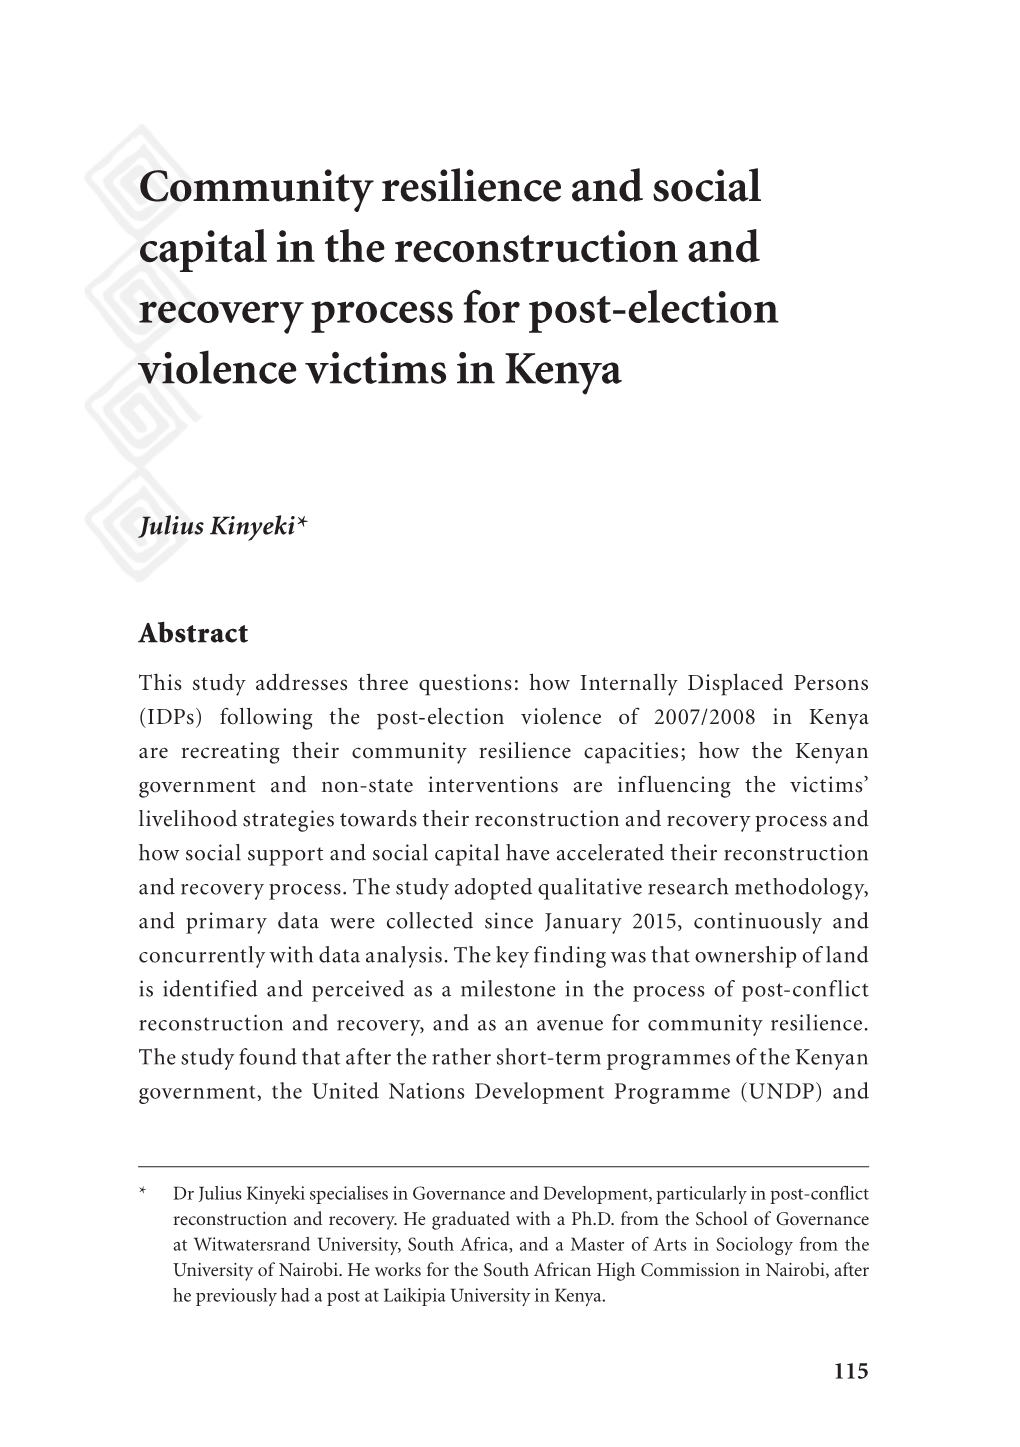 Community Resilience and Social Capital in the Reconstruction and Recovery Process for Post-Election Violence Victims in Kenya